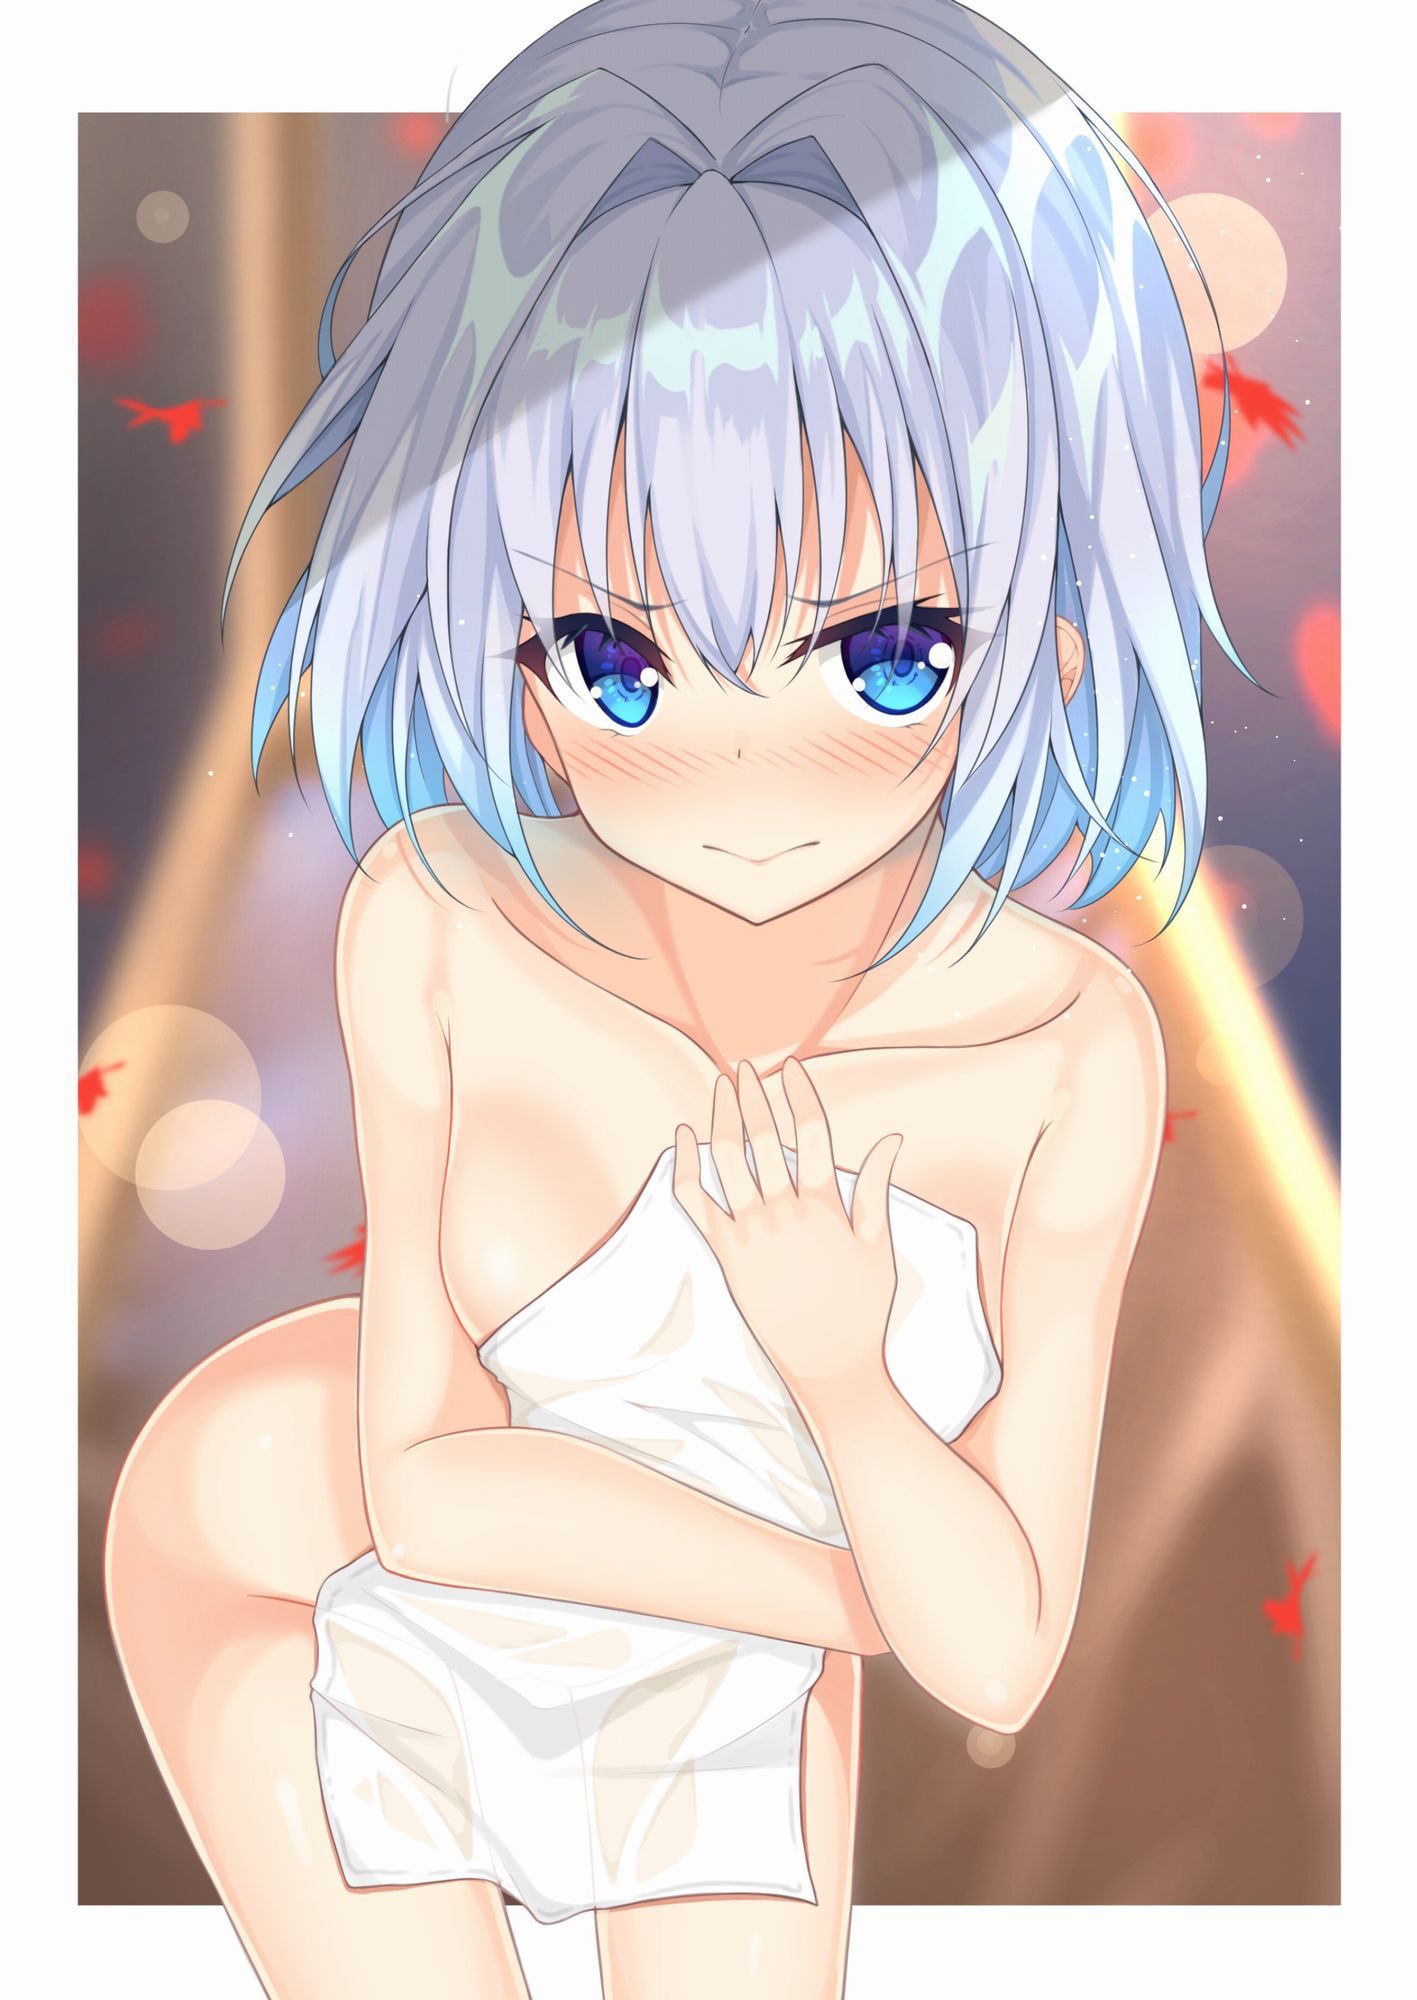 【Erotic Anime Summary】 Dosukebe Beauty and Beautiful Girls Hiding Their Nudity with a Single Towel 【Secondary Erotic】 9